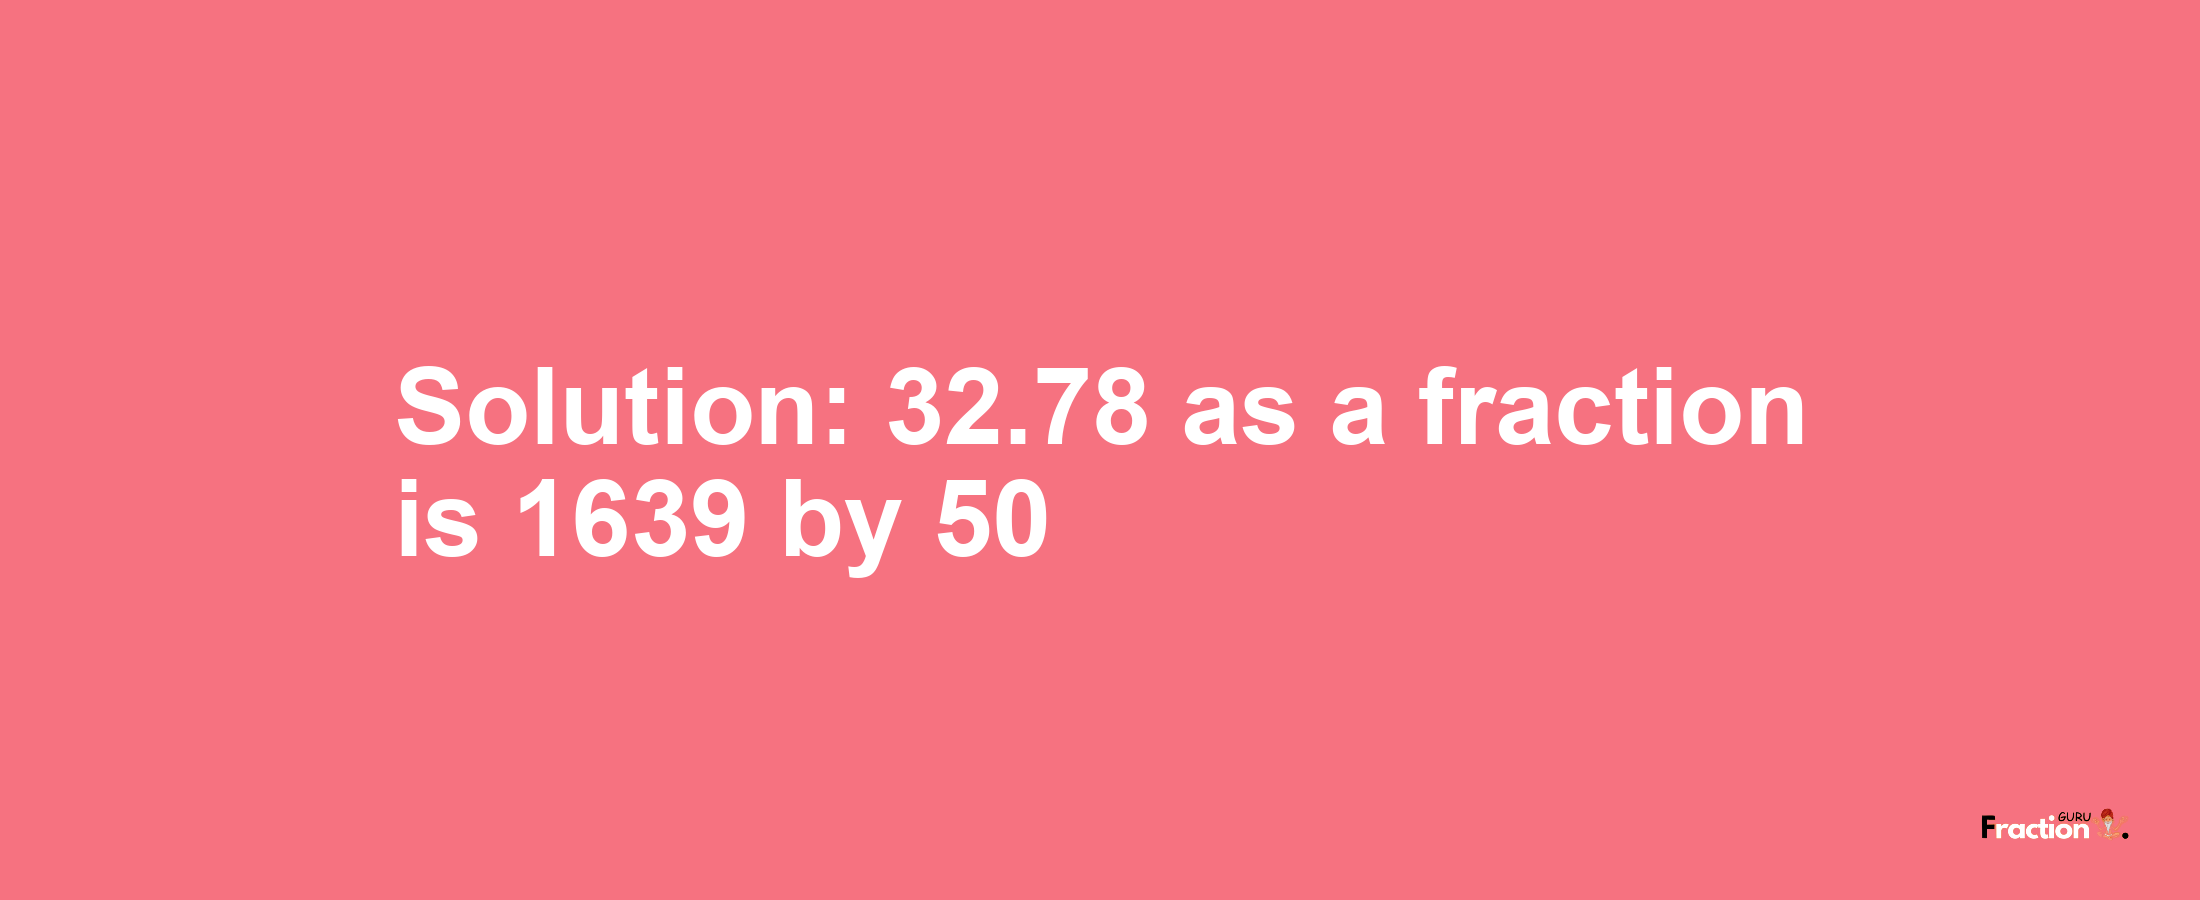 Solution:32.78 as a fraction is 1639/50